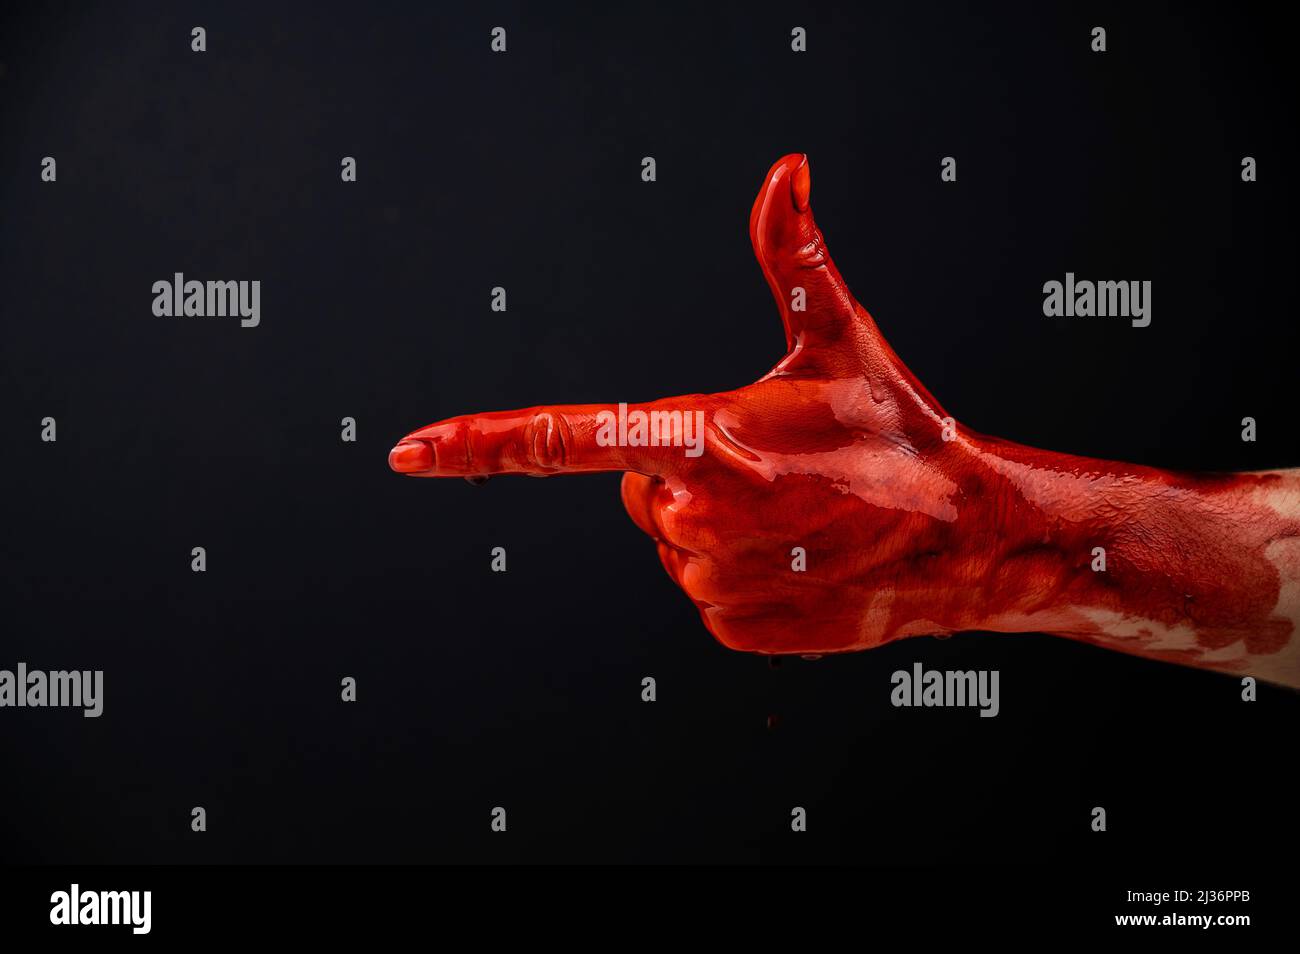 Woman's hand in blood shows a gesture of a gun on a black background.  Stock Photo